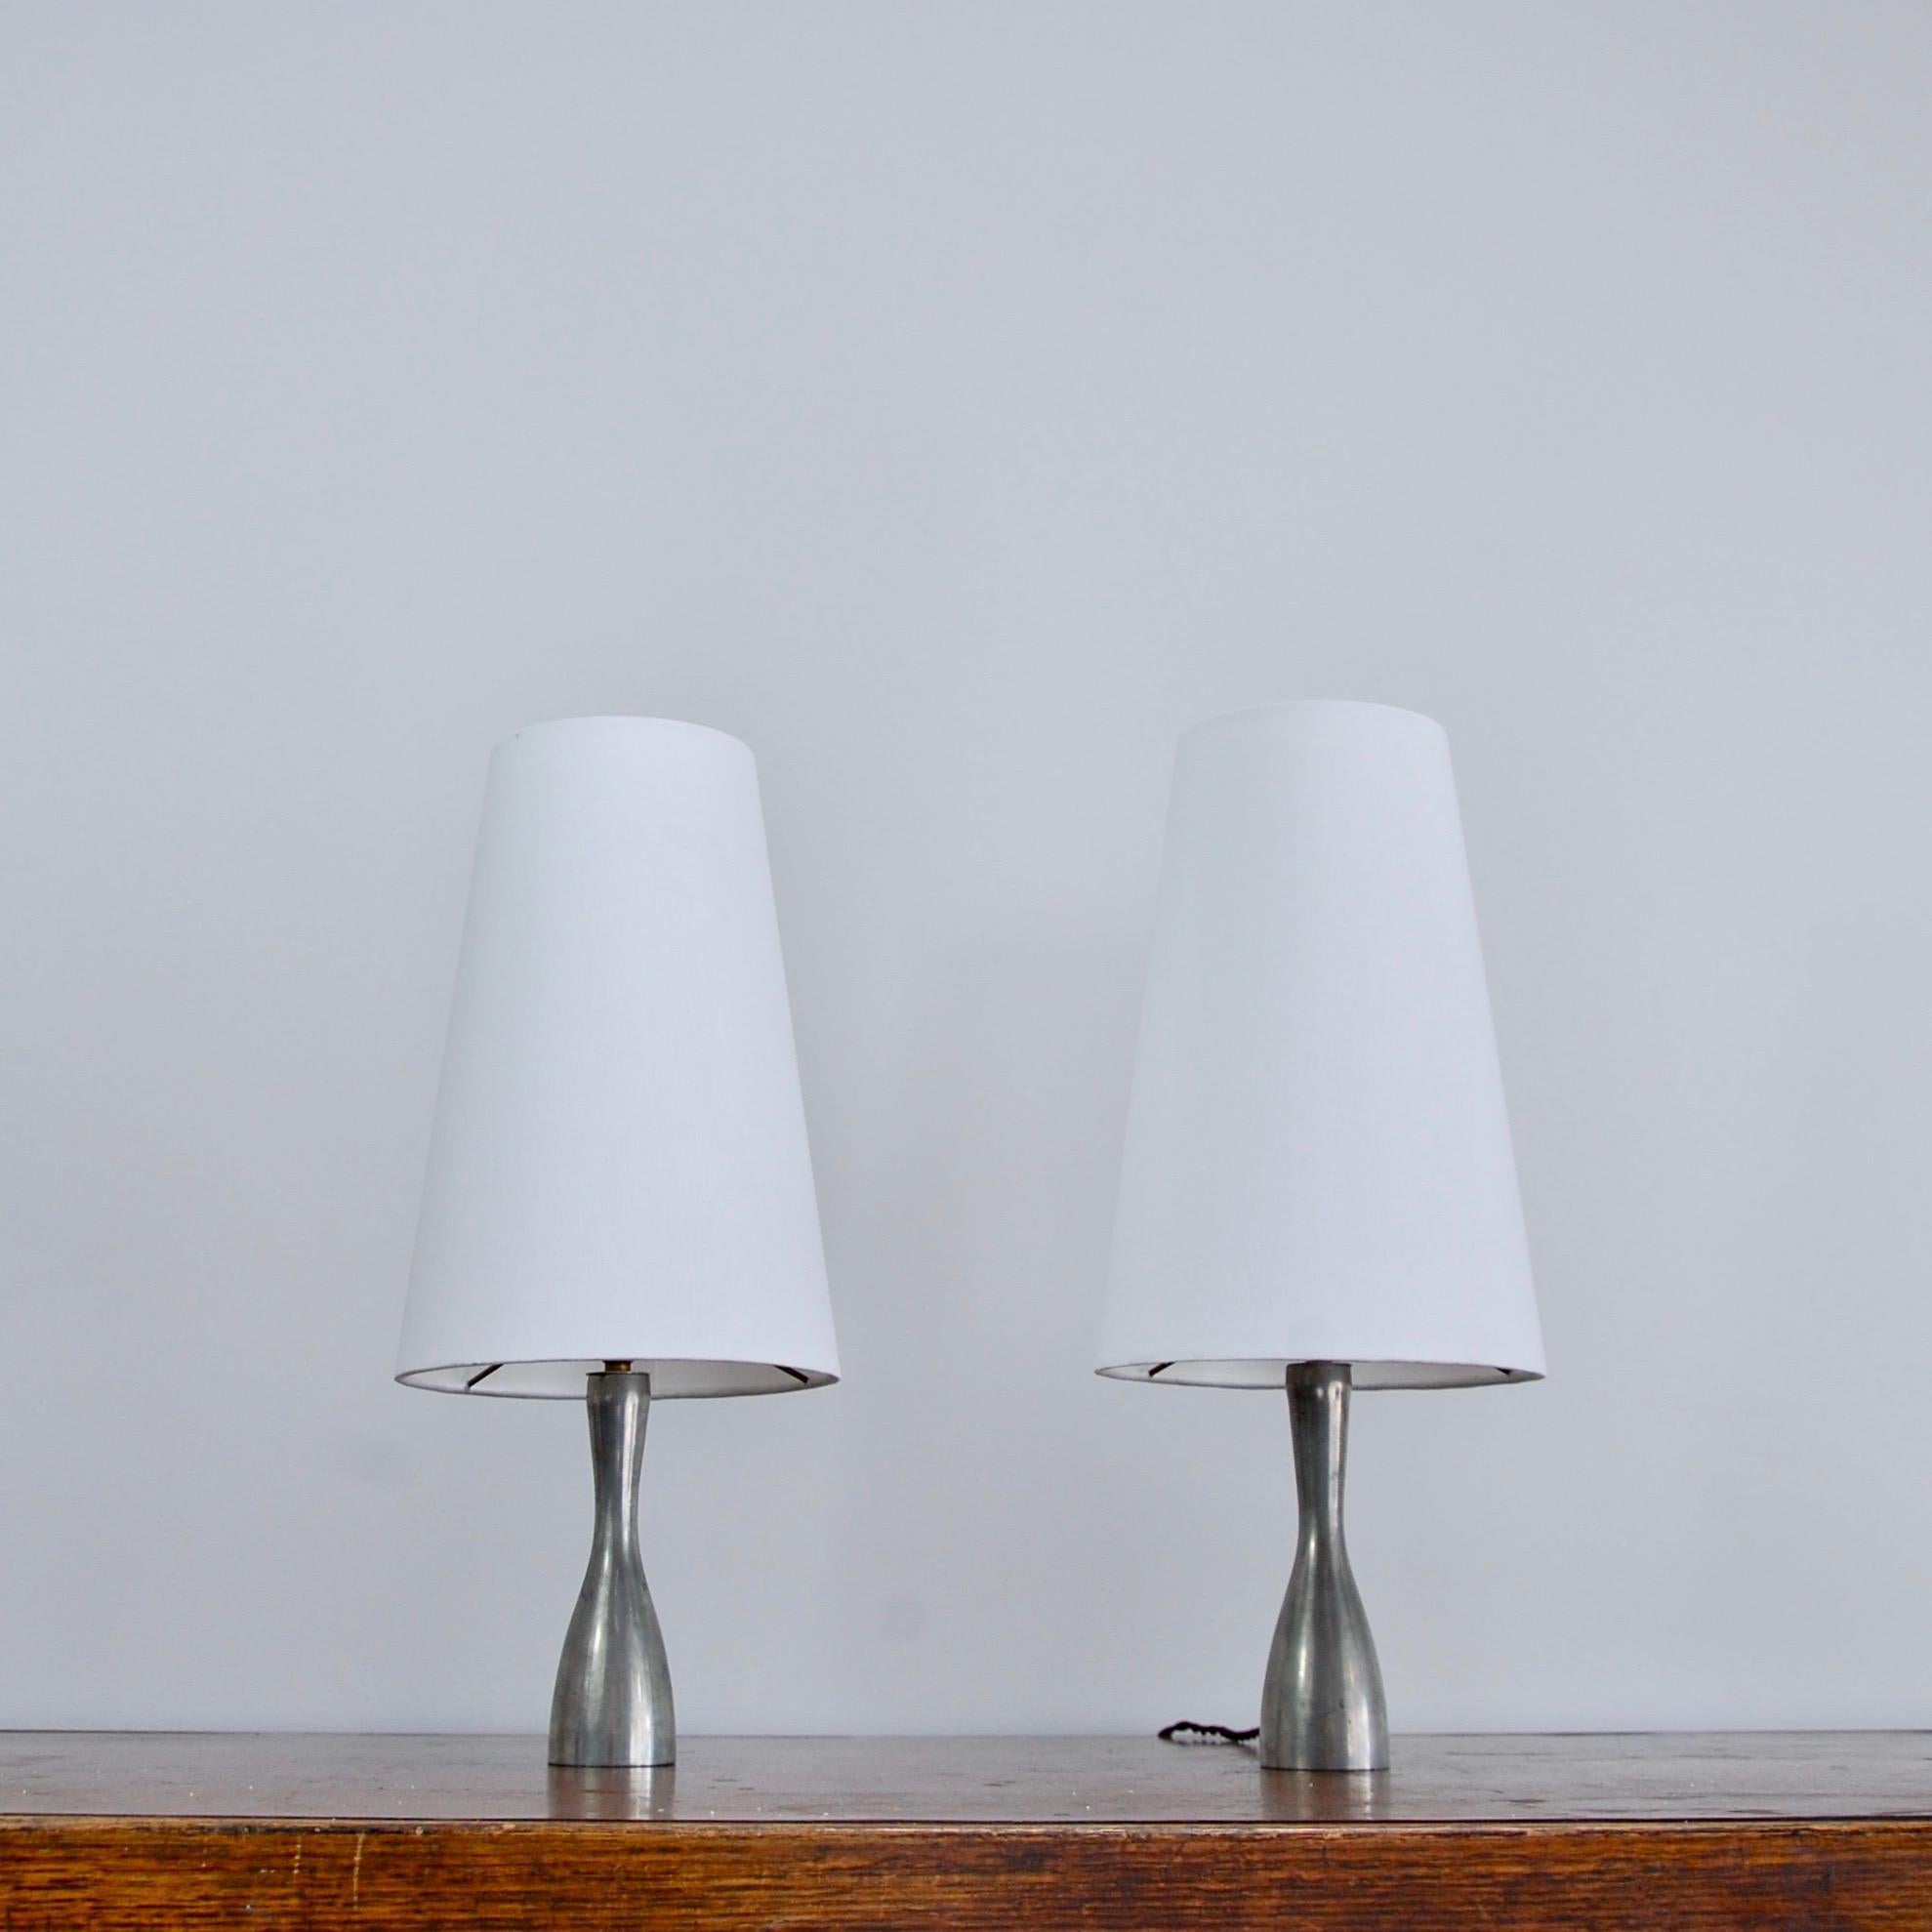 Pair of elegant Dutch pewter table lamps by Metawa of Holland from the 1960s. In pewter and fabric off-white silk shade. Rewired with single E12 candelabra based socket per table lamp. Currently wired for use in the US. Light bulbs included in